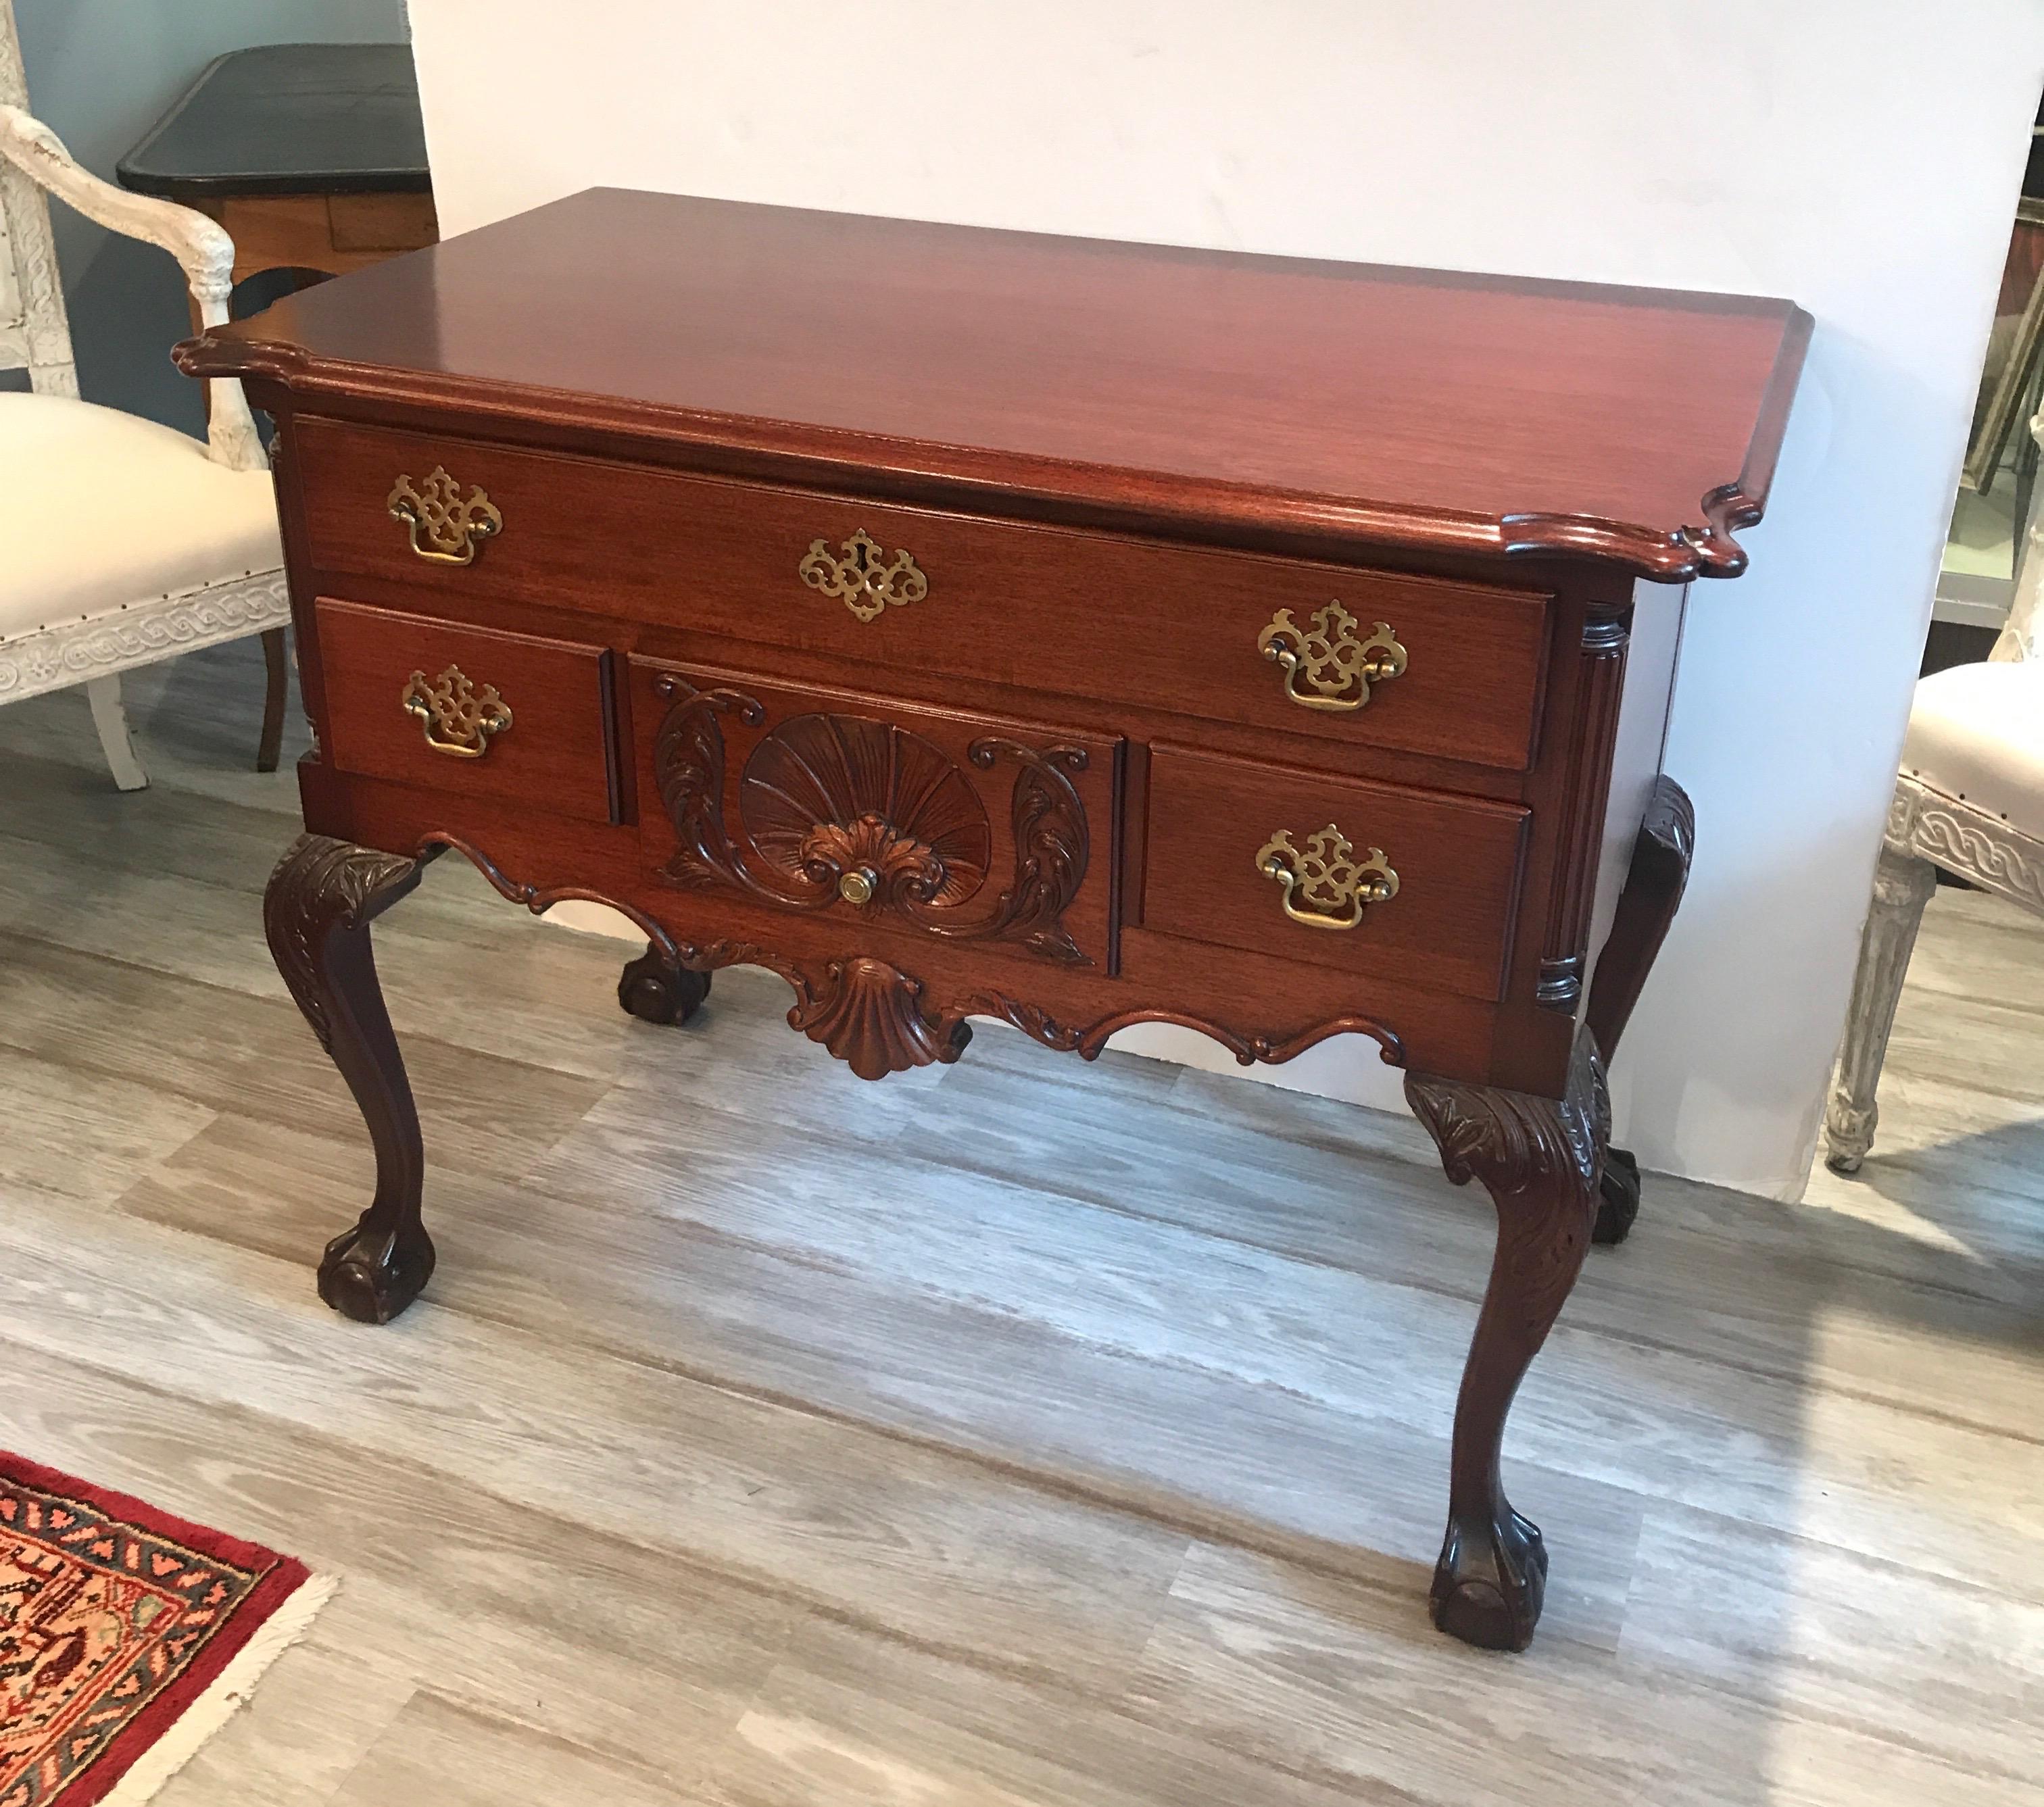 A classic Philadelphia Chippendale style hand carved mahogany lowboy. The upper long drawer with three smaller drawers resting on four hand carved acanthus leaf decorated legs with ball and claw feet. The top with scalloped corners.